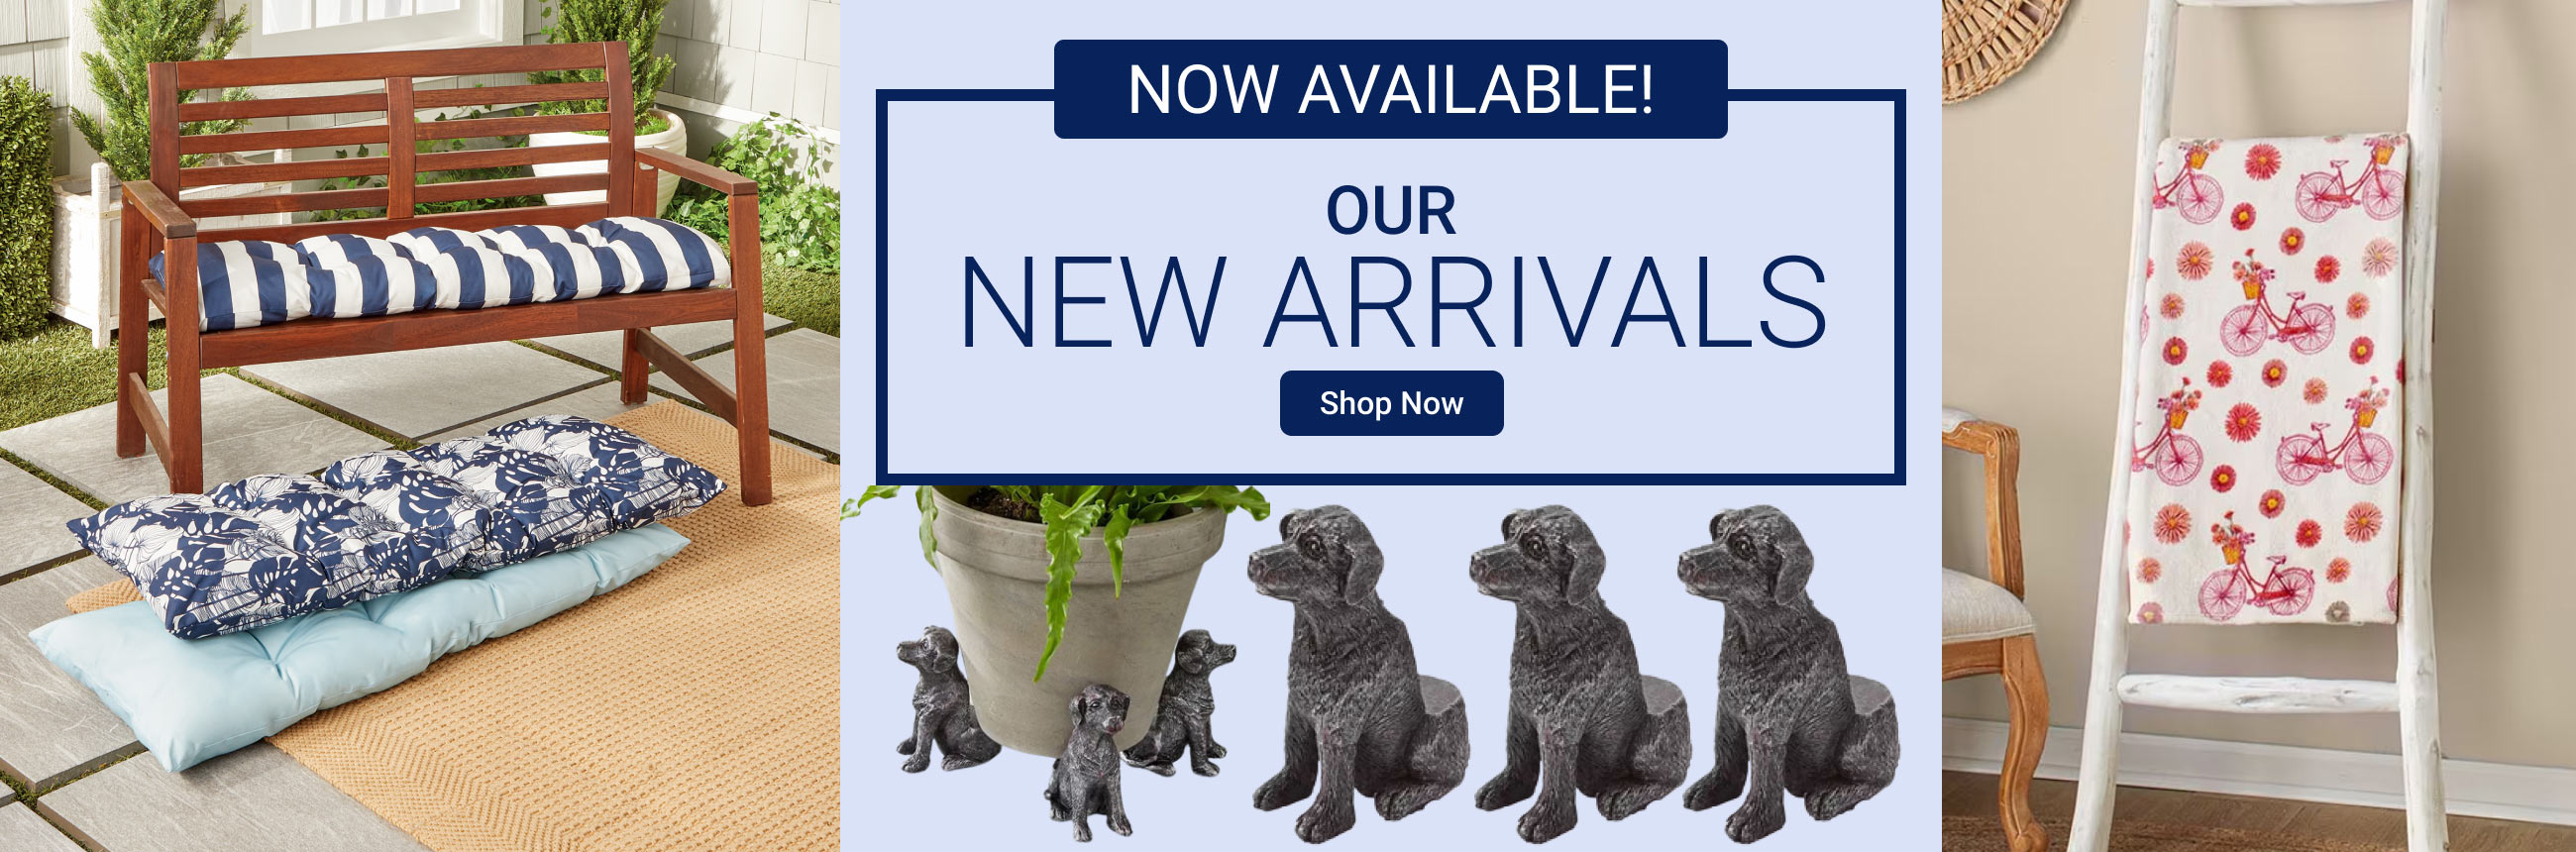 New arrivals now available! - Shop Now